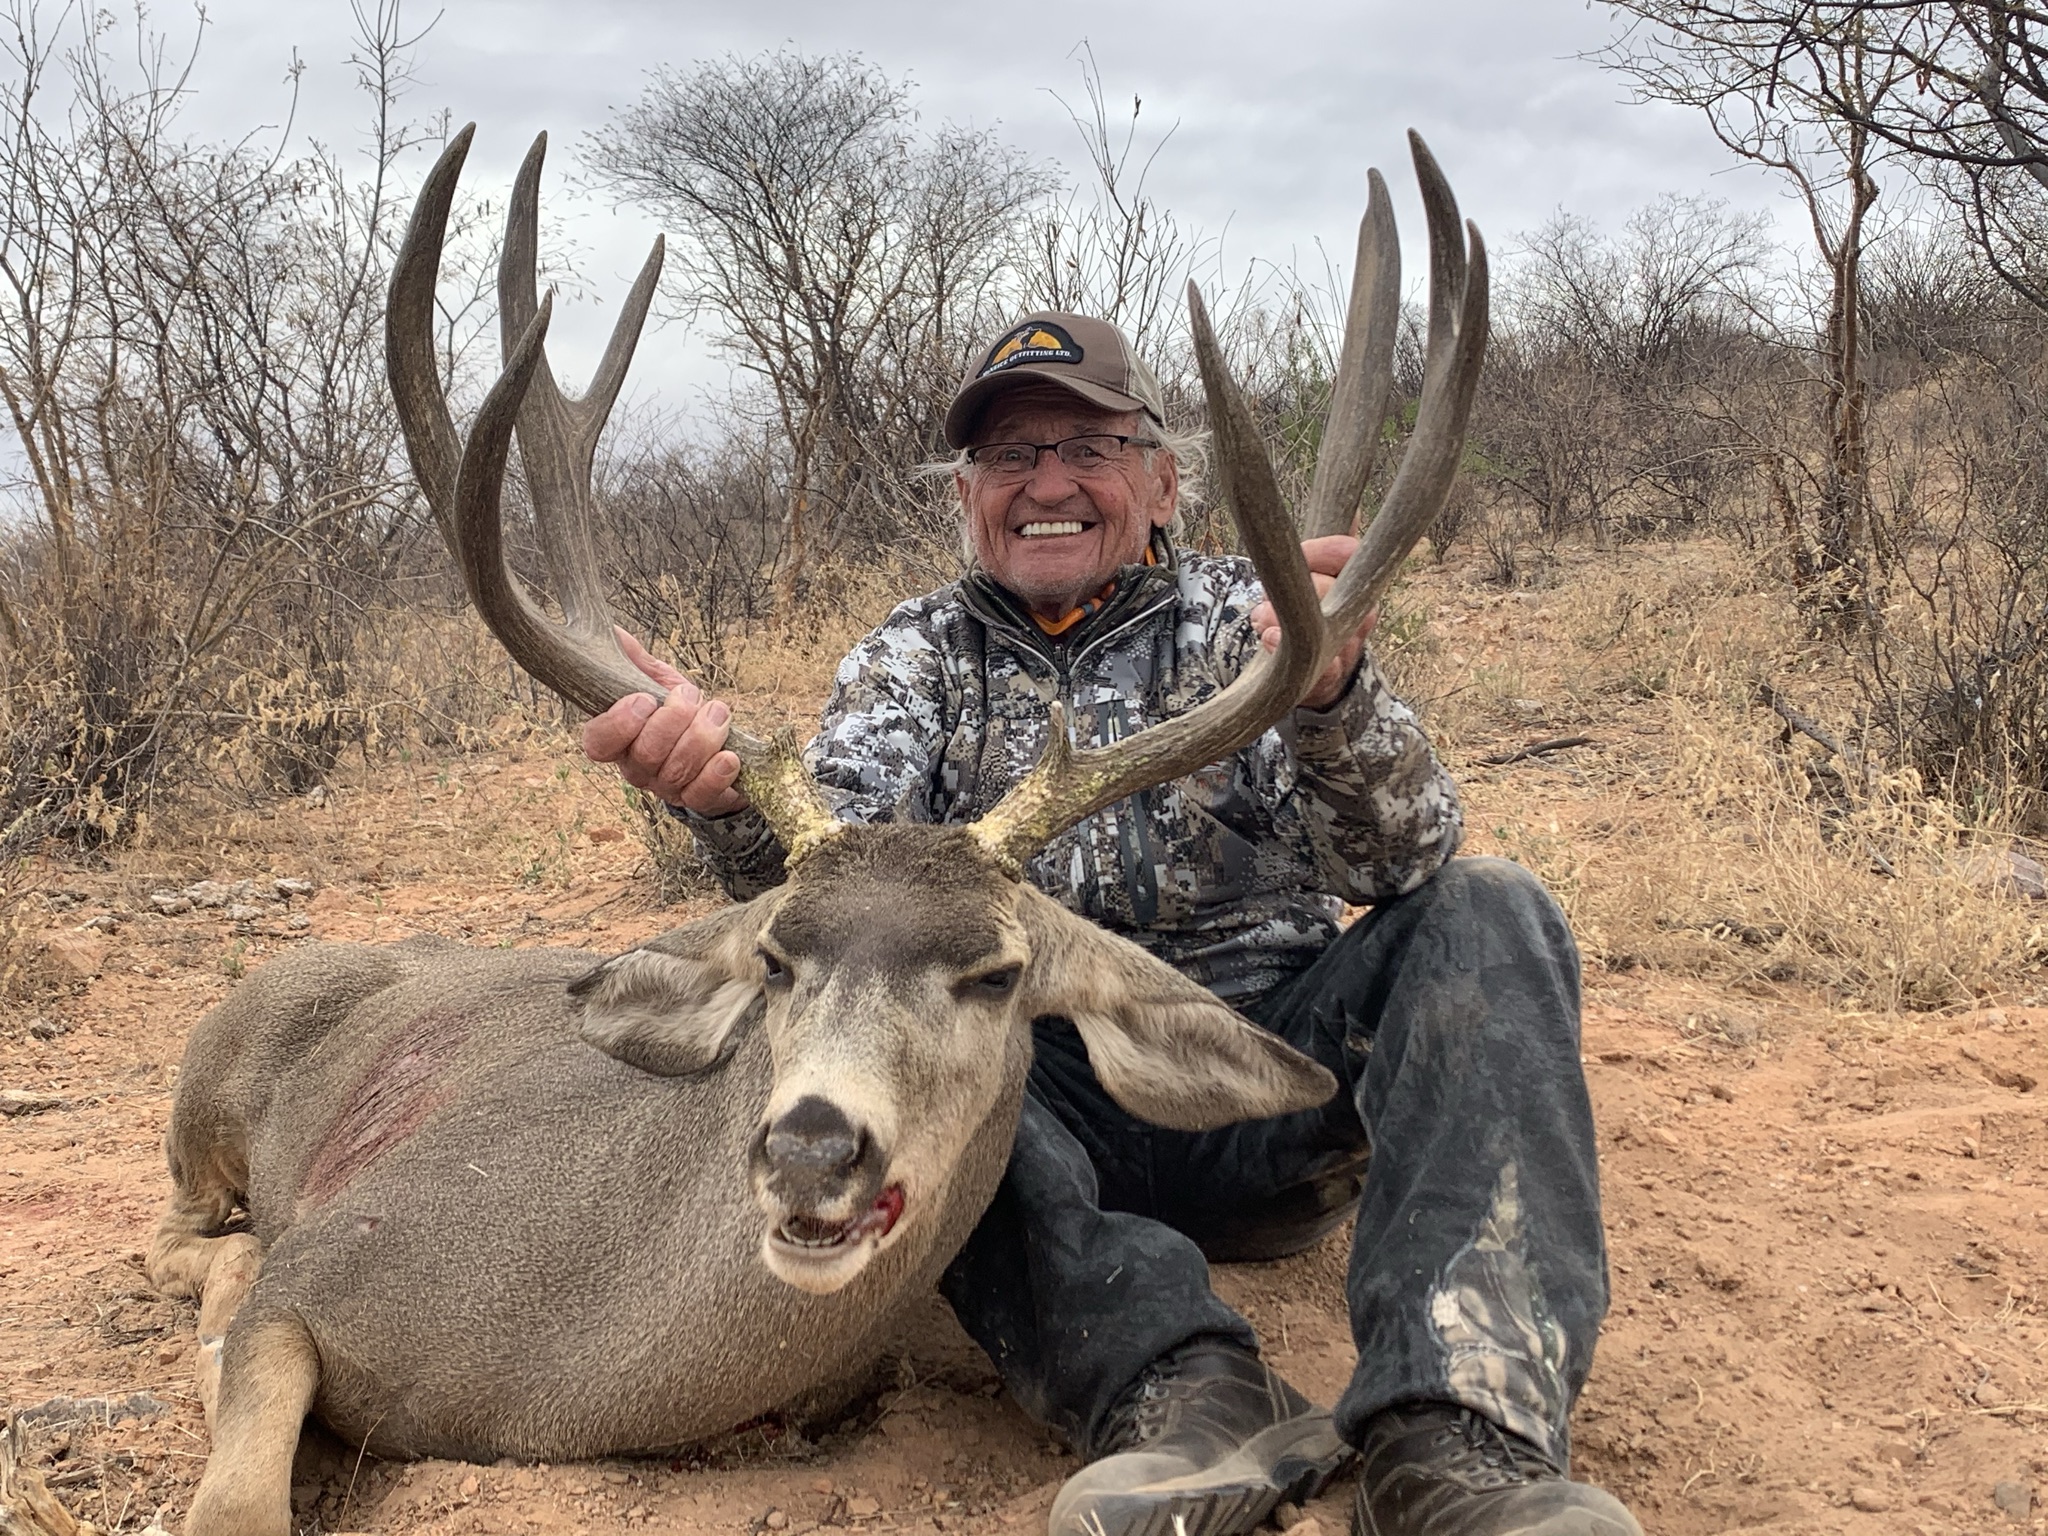 Sonora Mexico Private Land Trophy Mule Deer Hunt